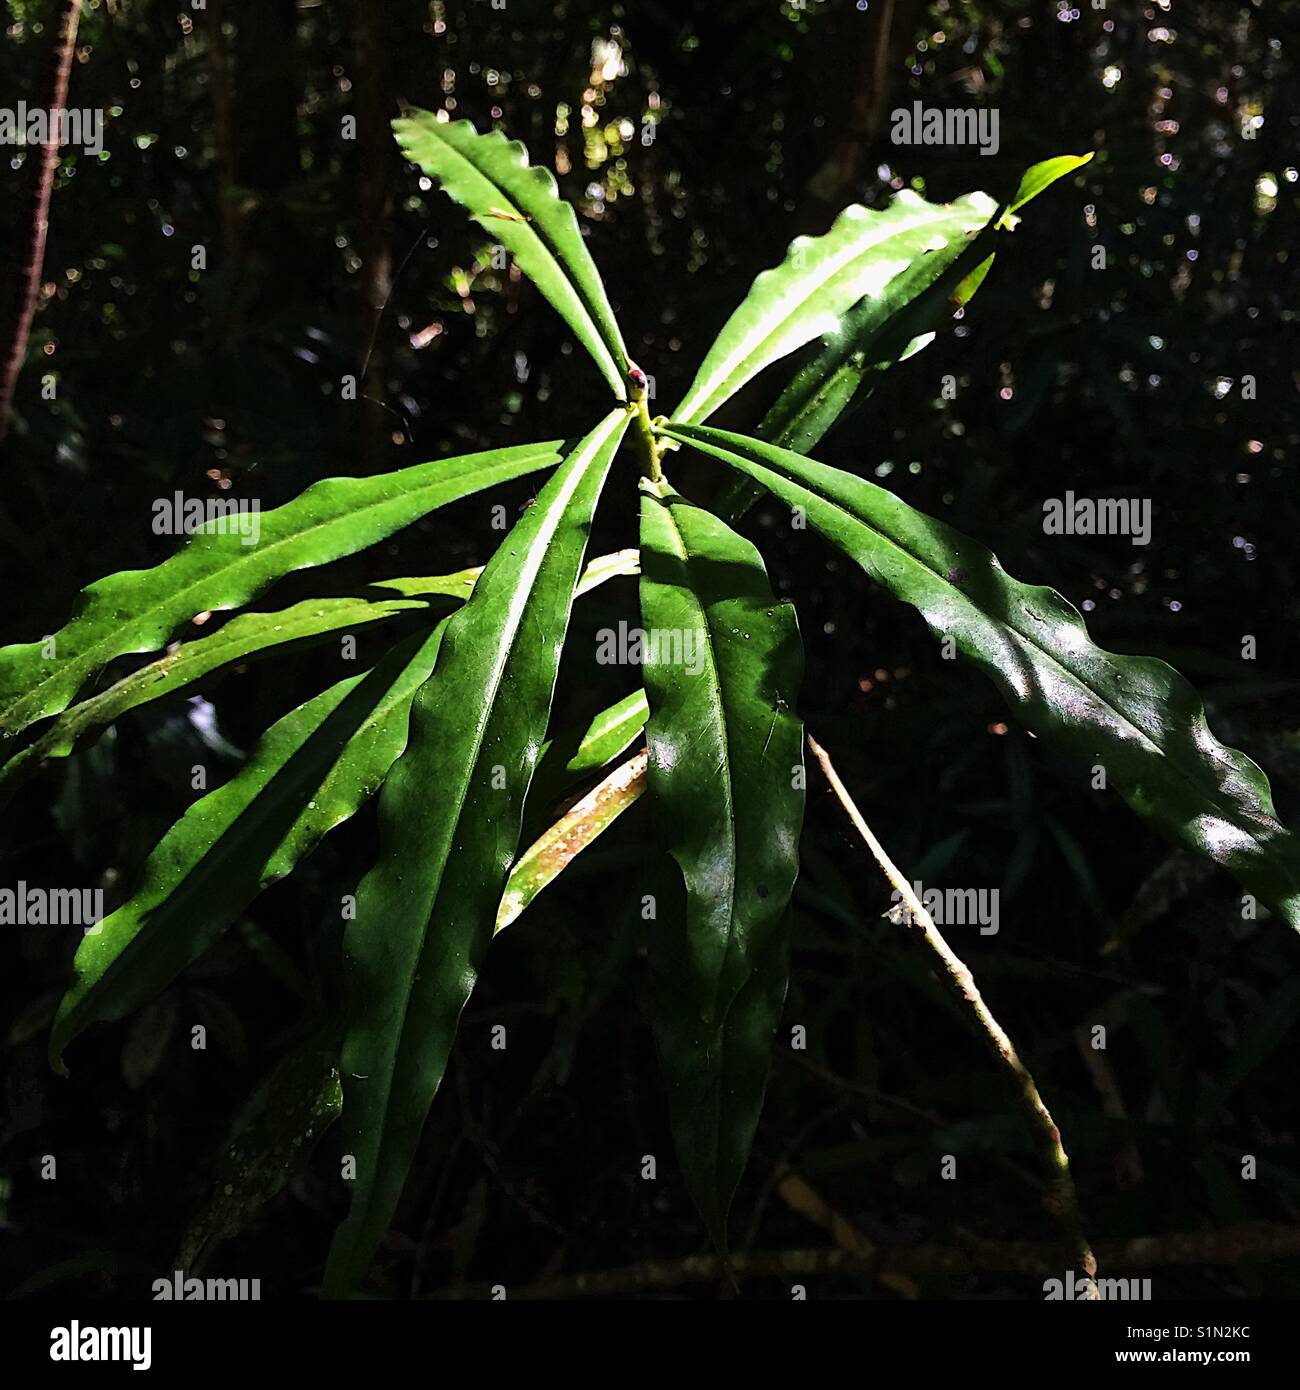 Plants in a rainforest Stock Photo